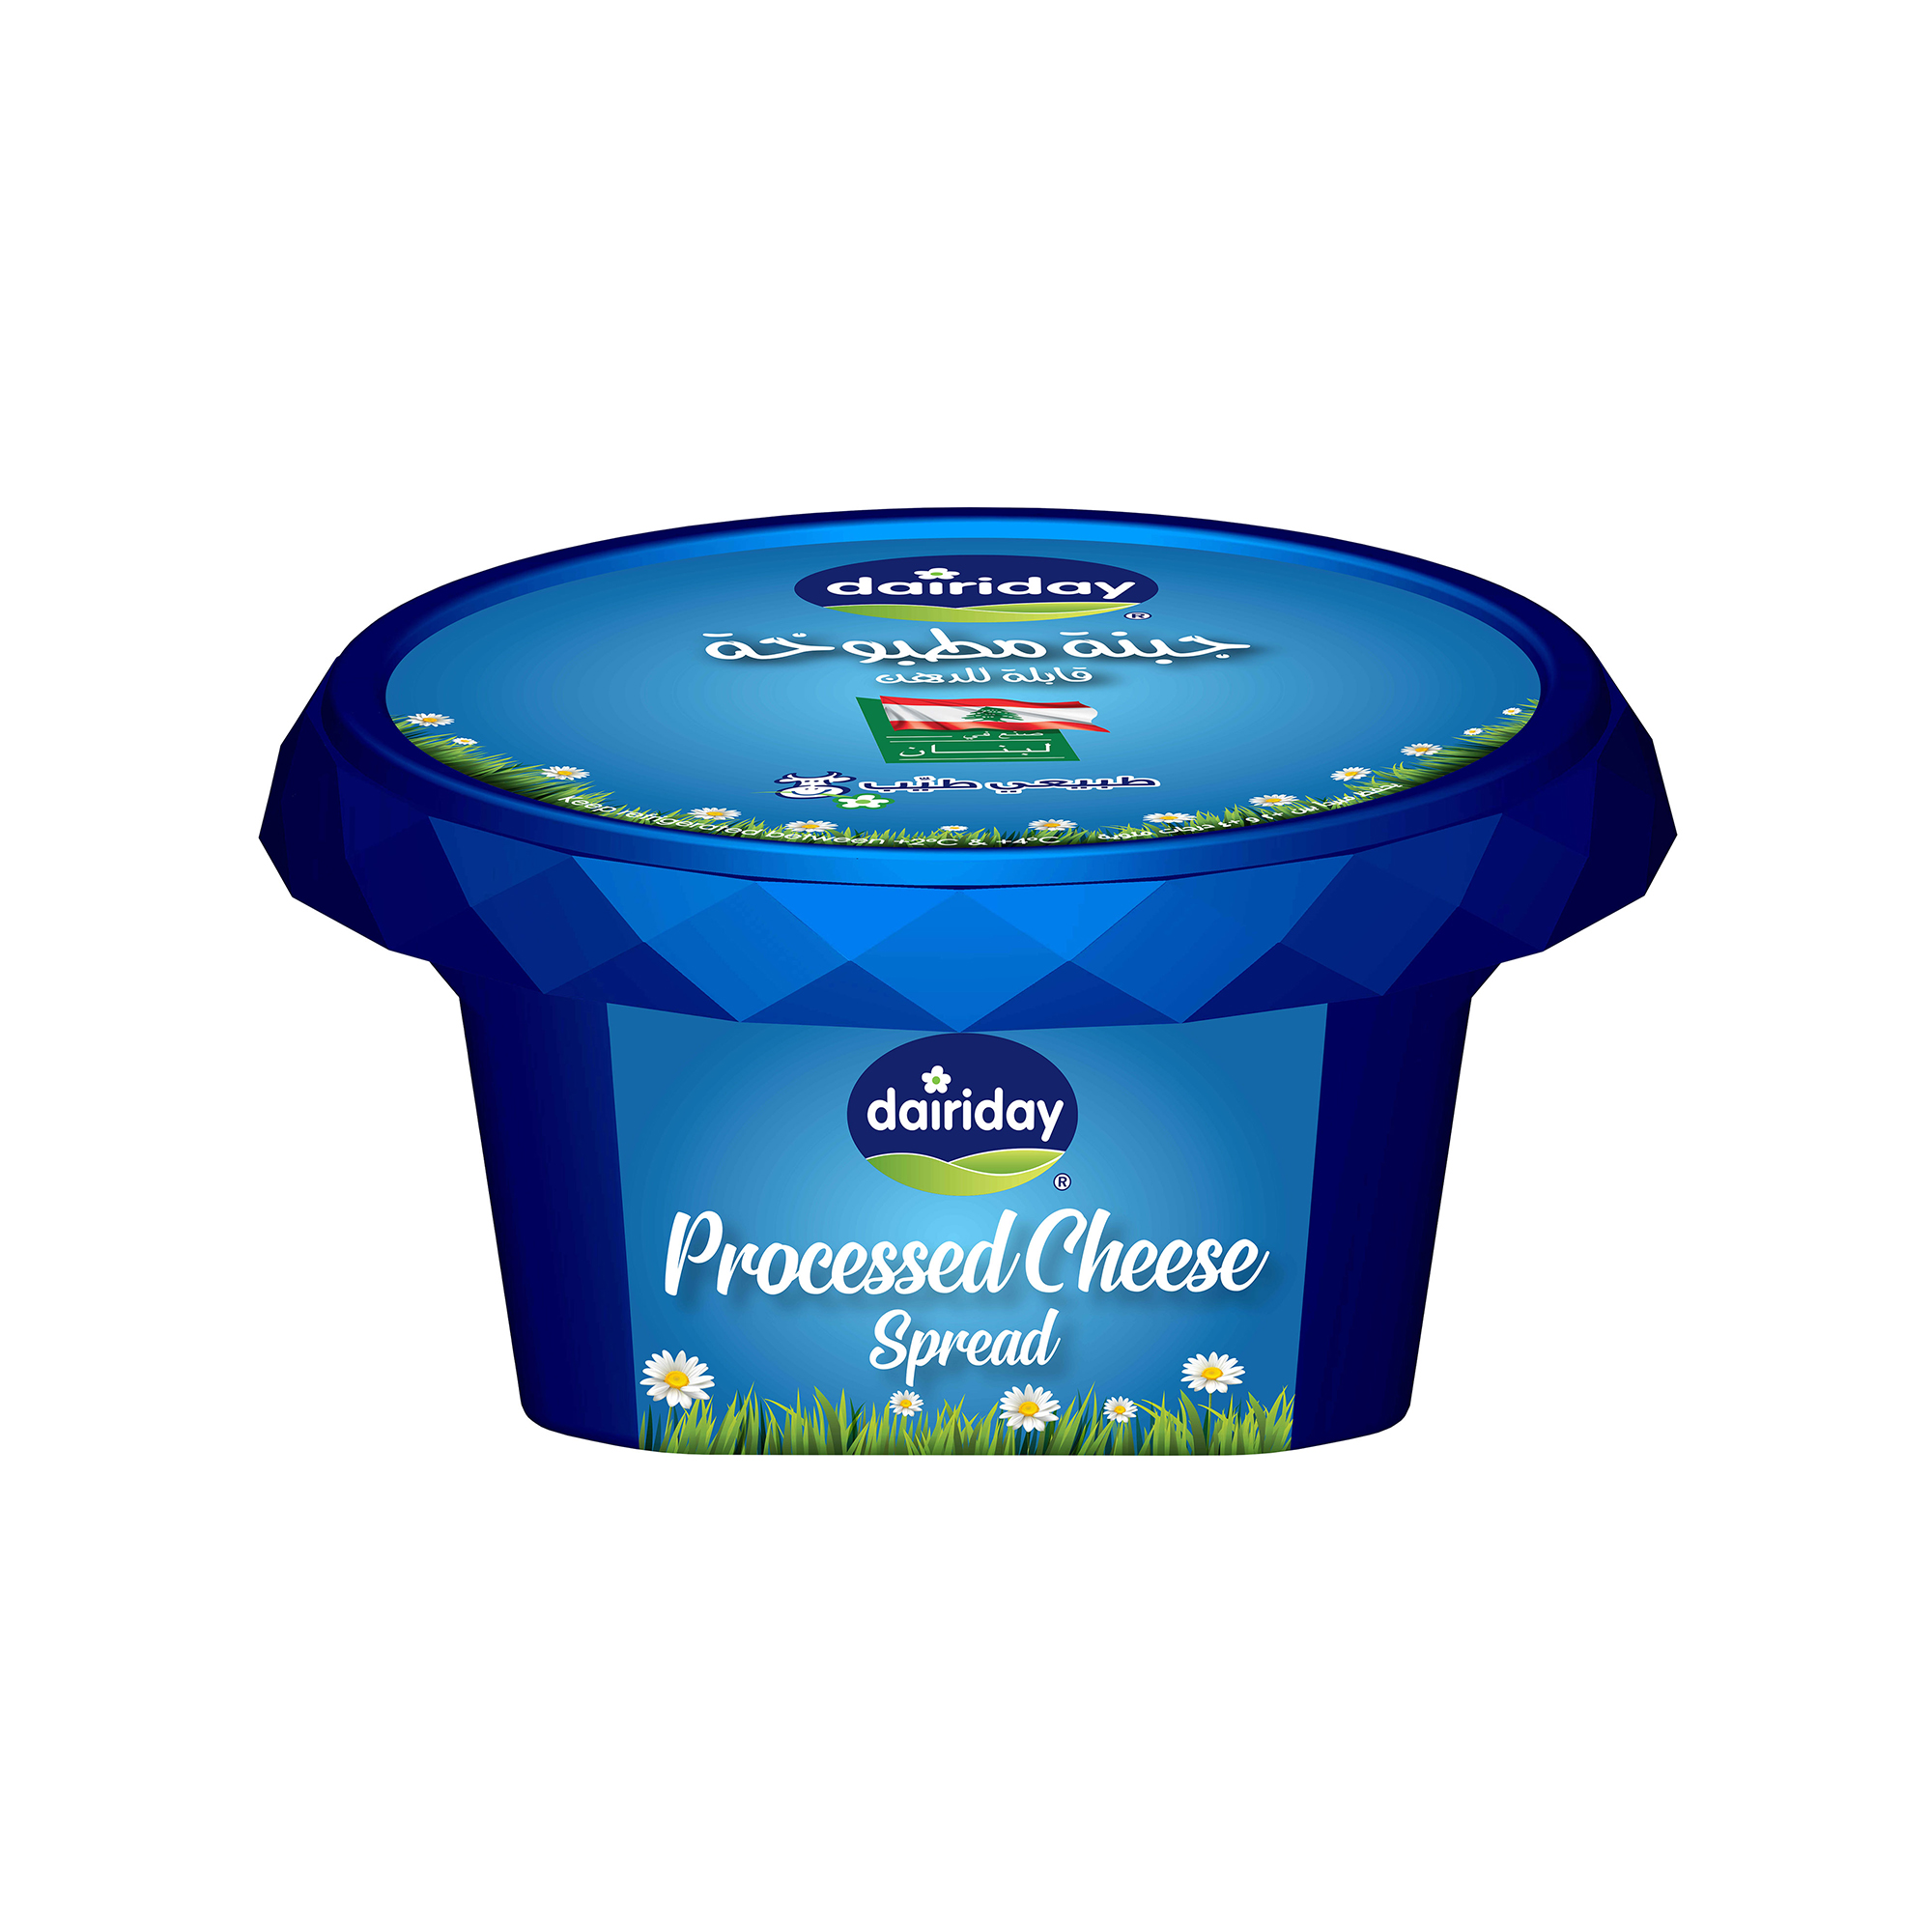 Dairiday-Processed-Cheese-Spread-80g